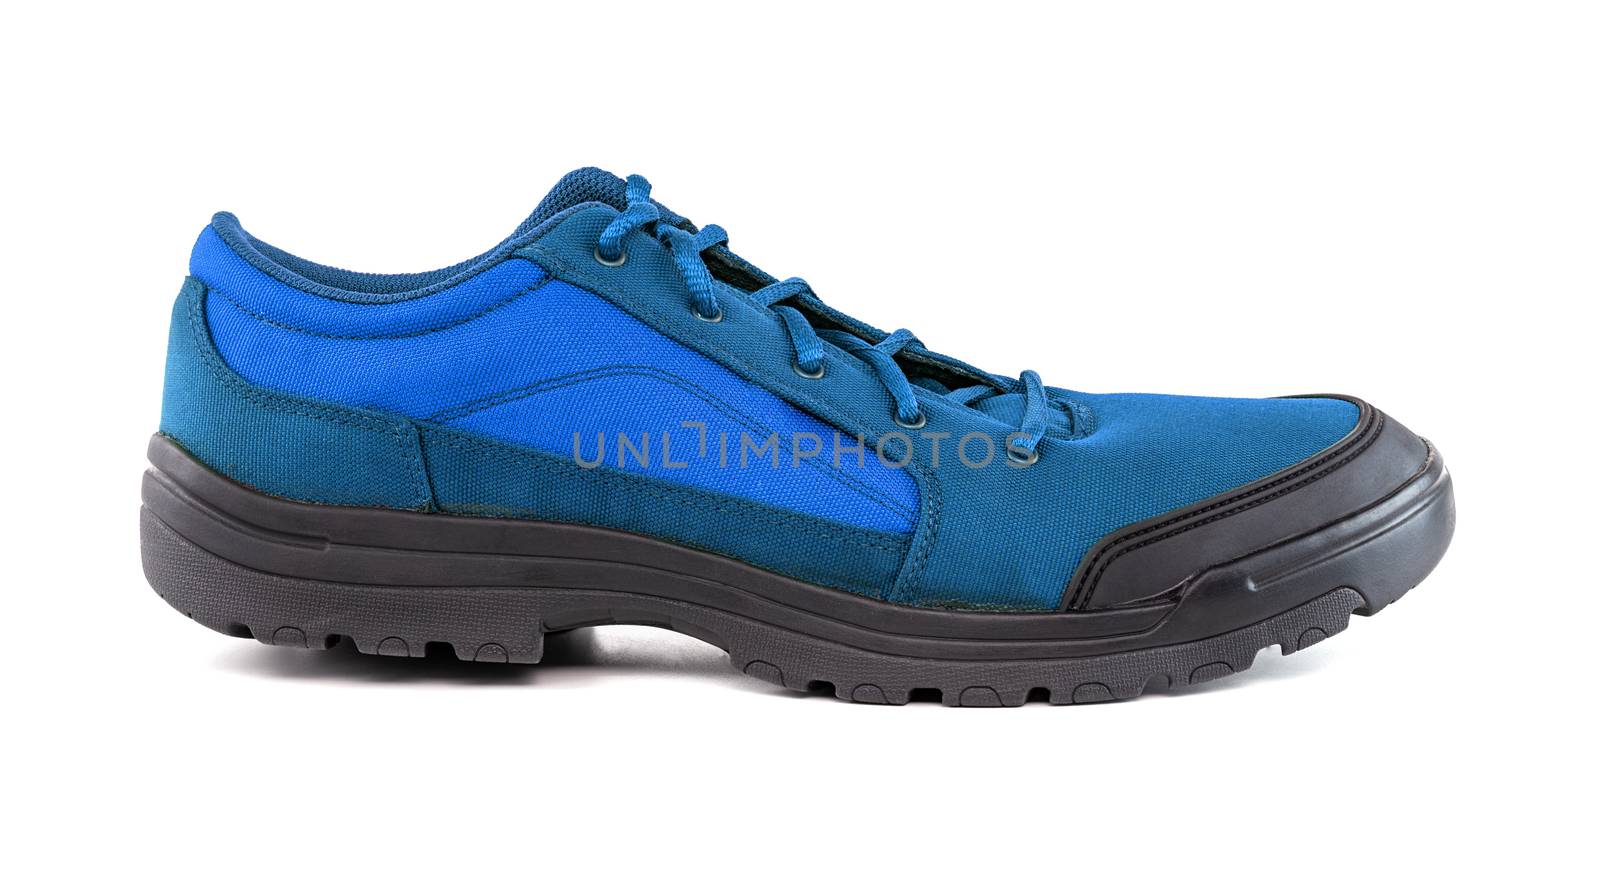 right cheap light blue hiking or hunting shoe isolated on white background, side view by z1b